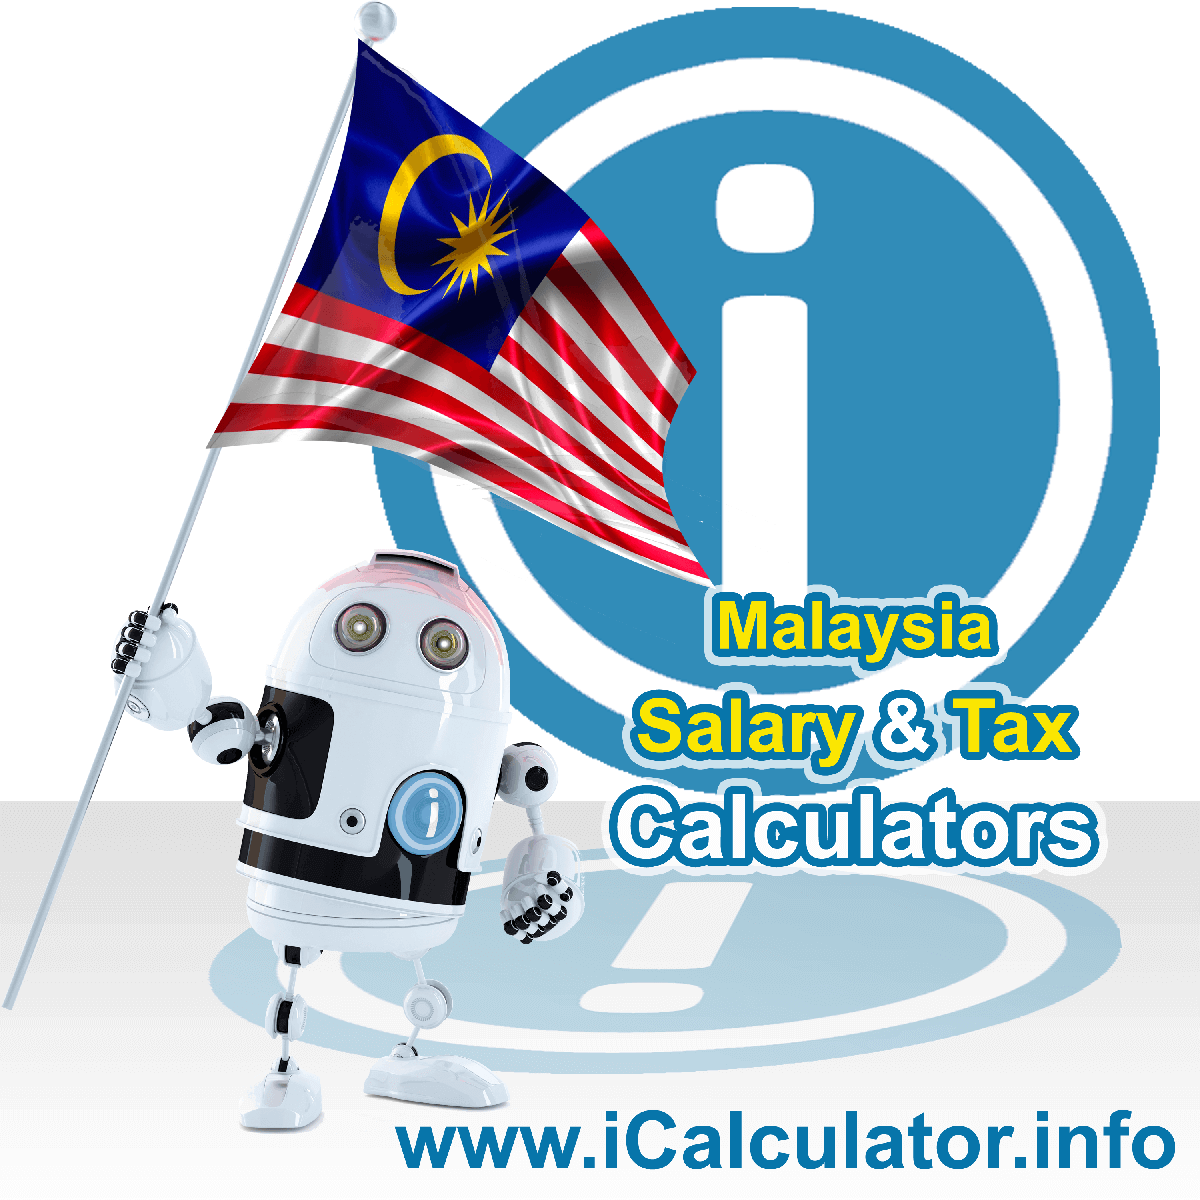 Malaysia Tax Calculator. This image shows the Malaysia flag and information relating to the tax formula for the Malaysia Salary Calculator